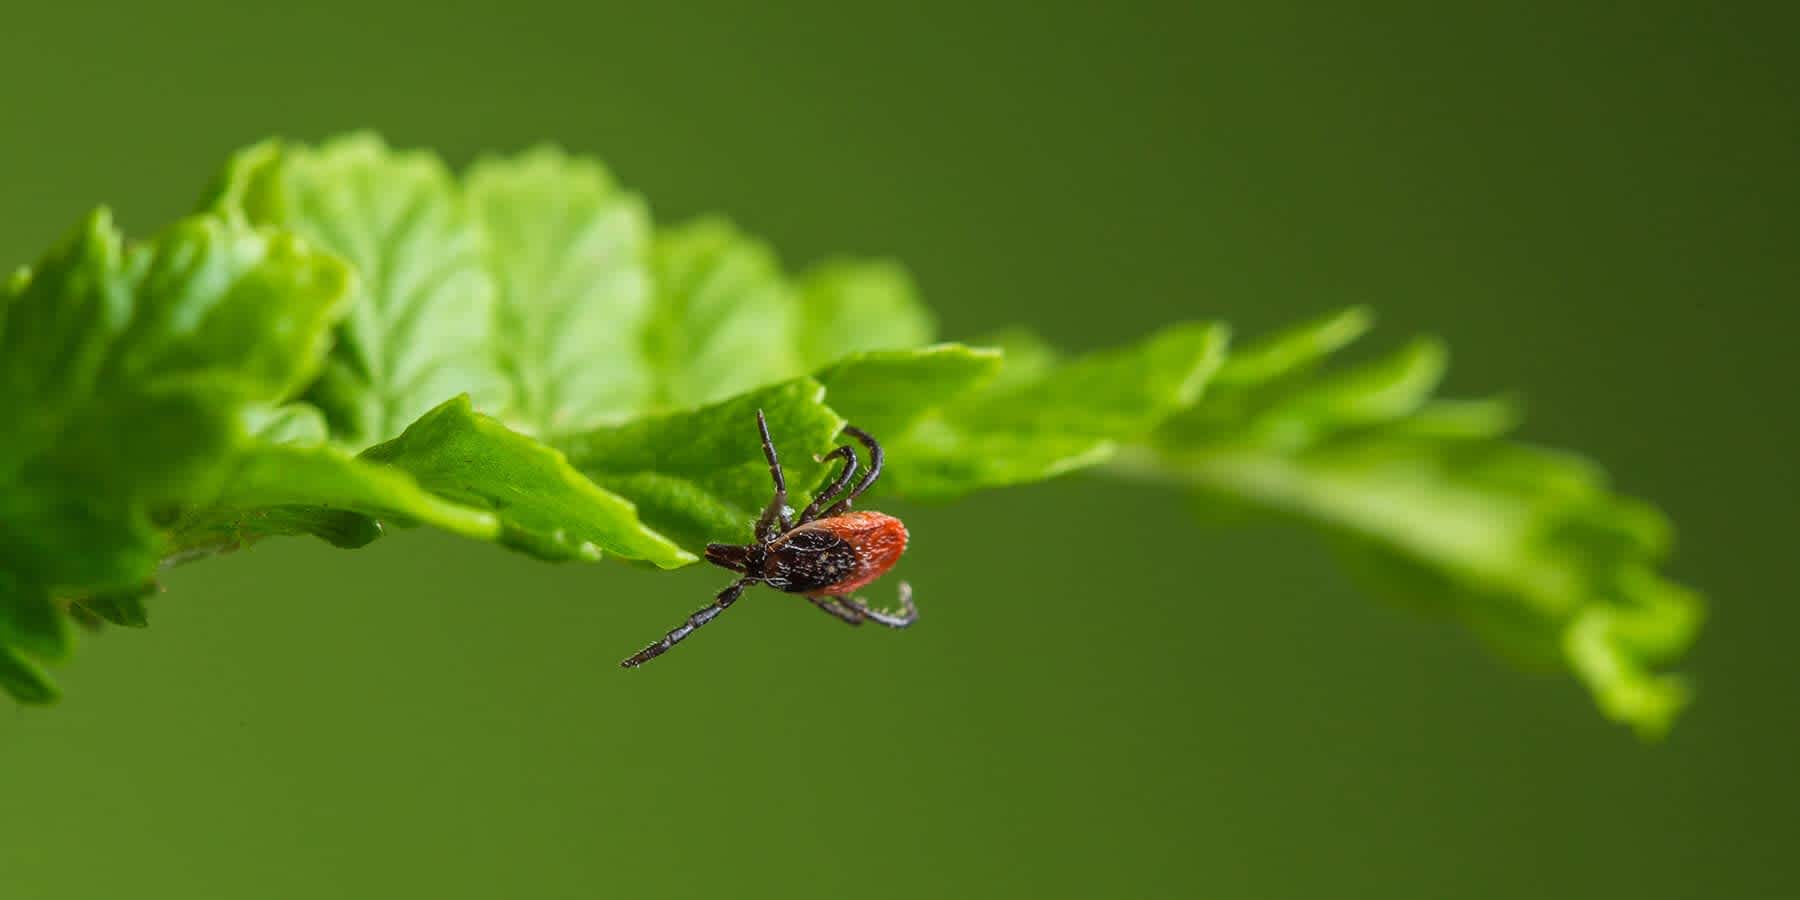 Tick with Lyme disease bacteria hanging on leaf in area of high Lyme disease prevalence